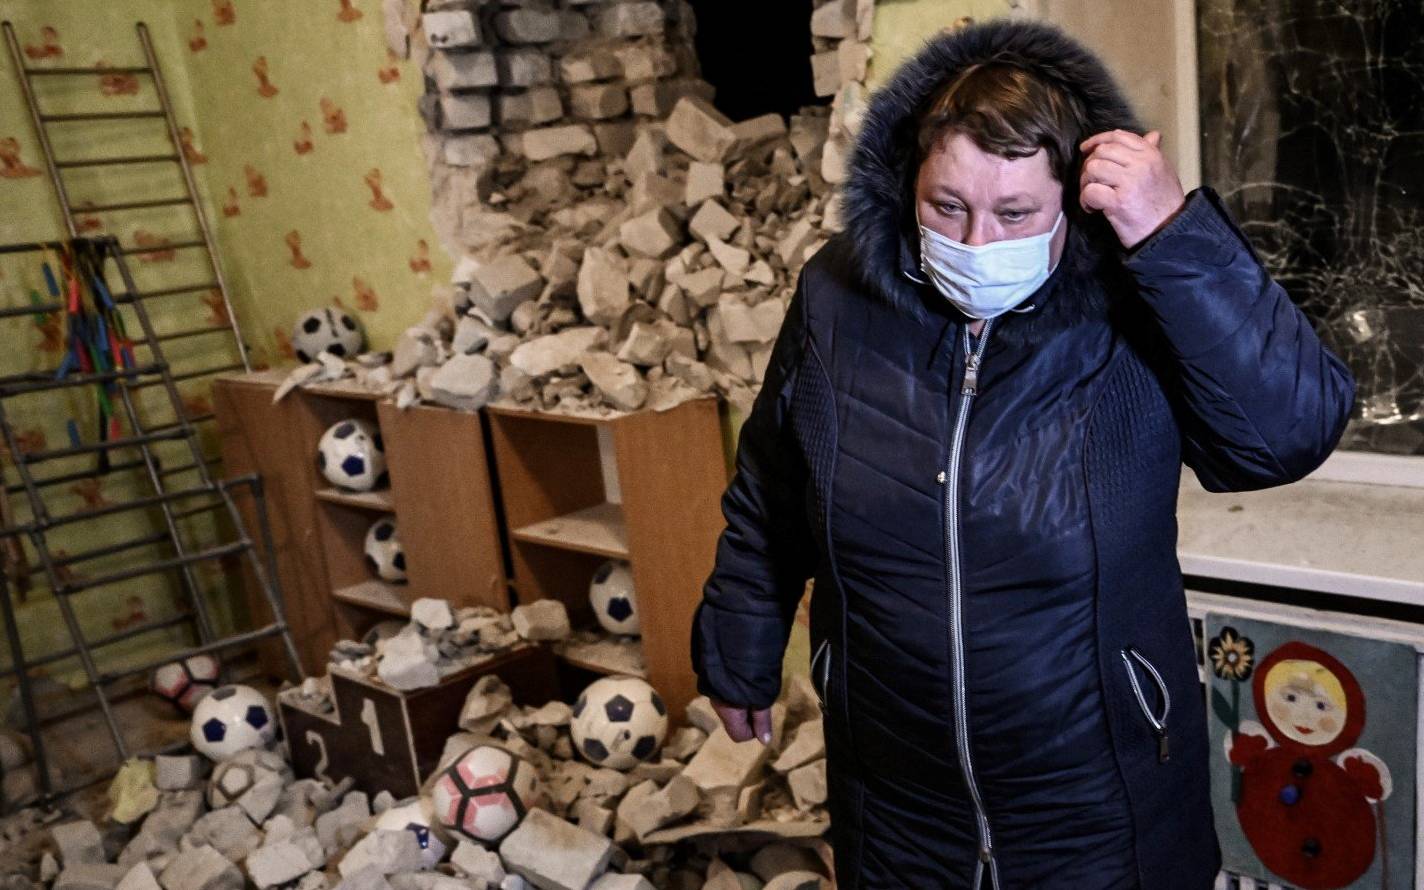 A woman stands inside among debris after the reported shelling of a kindergarden in the settlement of Stanytsia Luhanska, Ukraine, on February 17, 2022. - U.S. Defence Secretary Lloyd Austin warned on February 17, 2022, of a provocation by Moscow to justify military intervention in Ukraine after "disturbing" reports of mutual accusations of bombing between the Ukrainian military and pro-Russian separatists. (Photo by Aris Messinis / AFP)